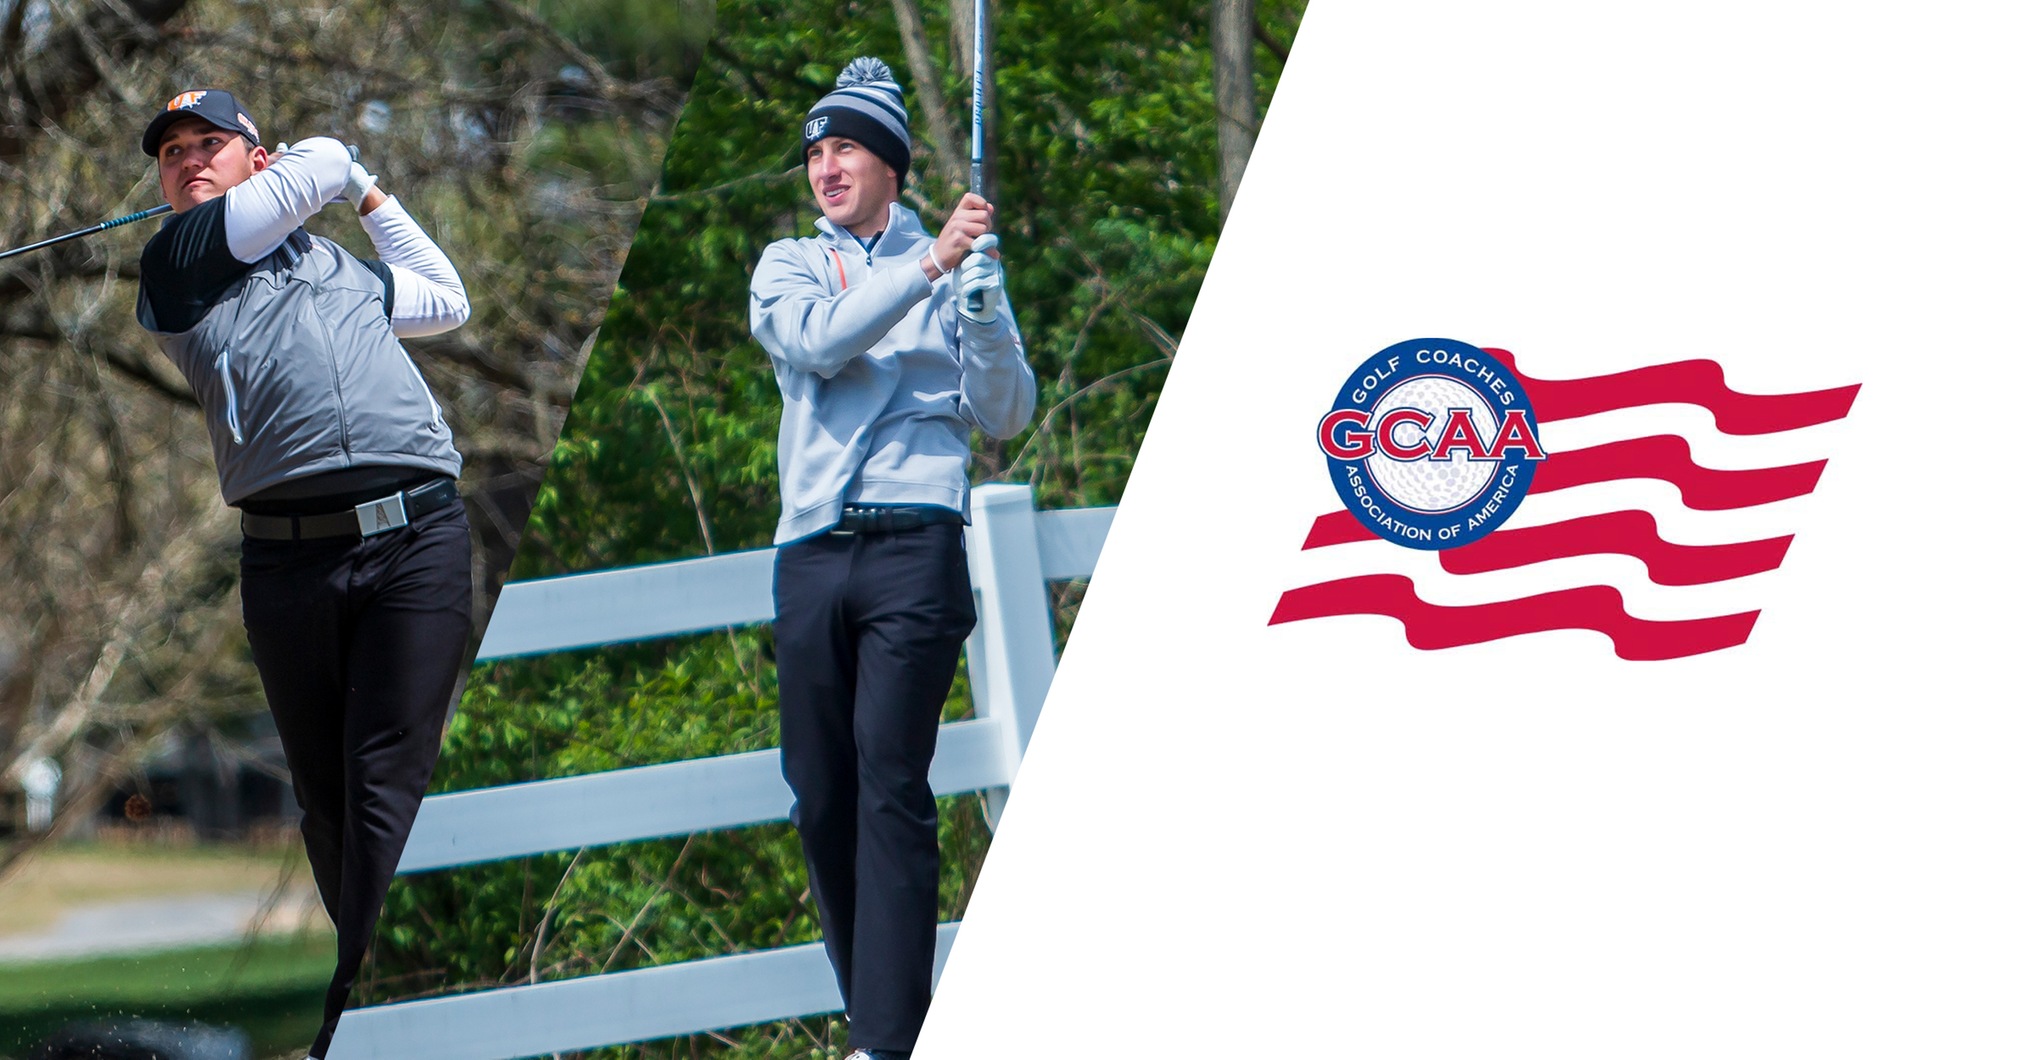 DeWitt and Kelly Earn Scholar All-American Honor from GCAA